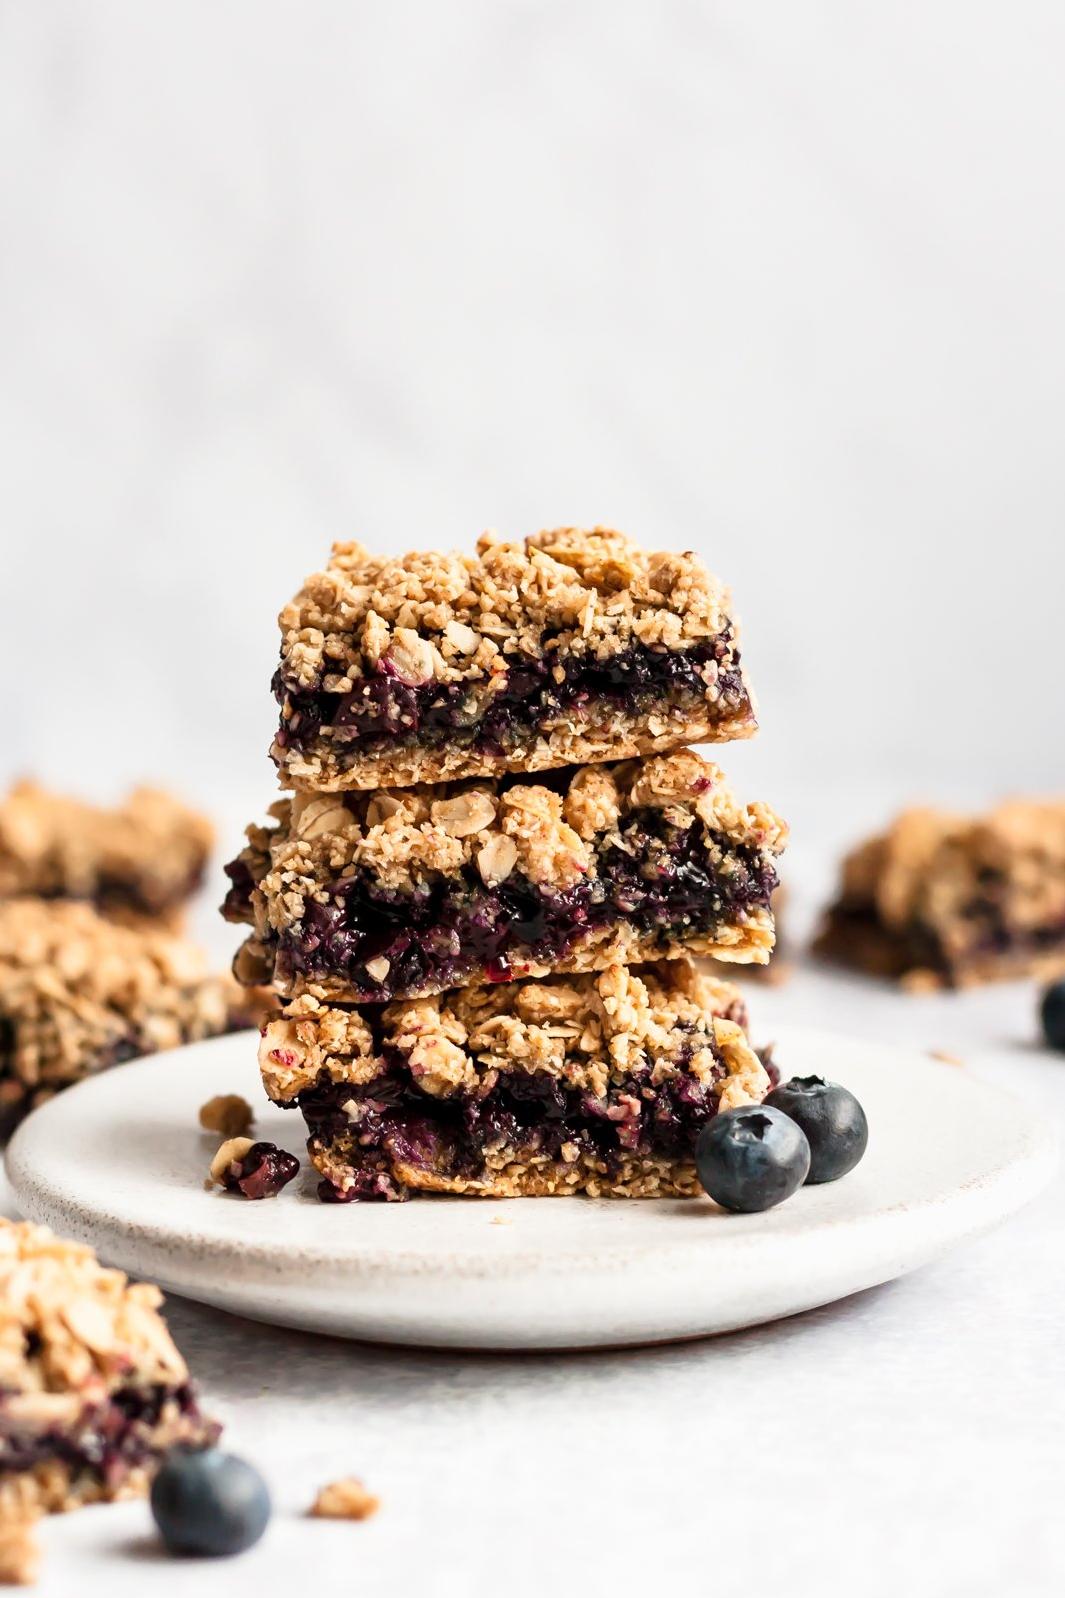  The crumbly crust provides a nice texture to these bars.